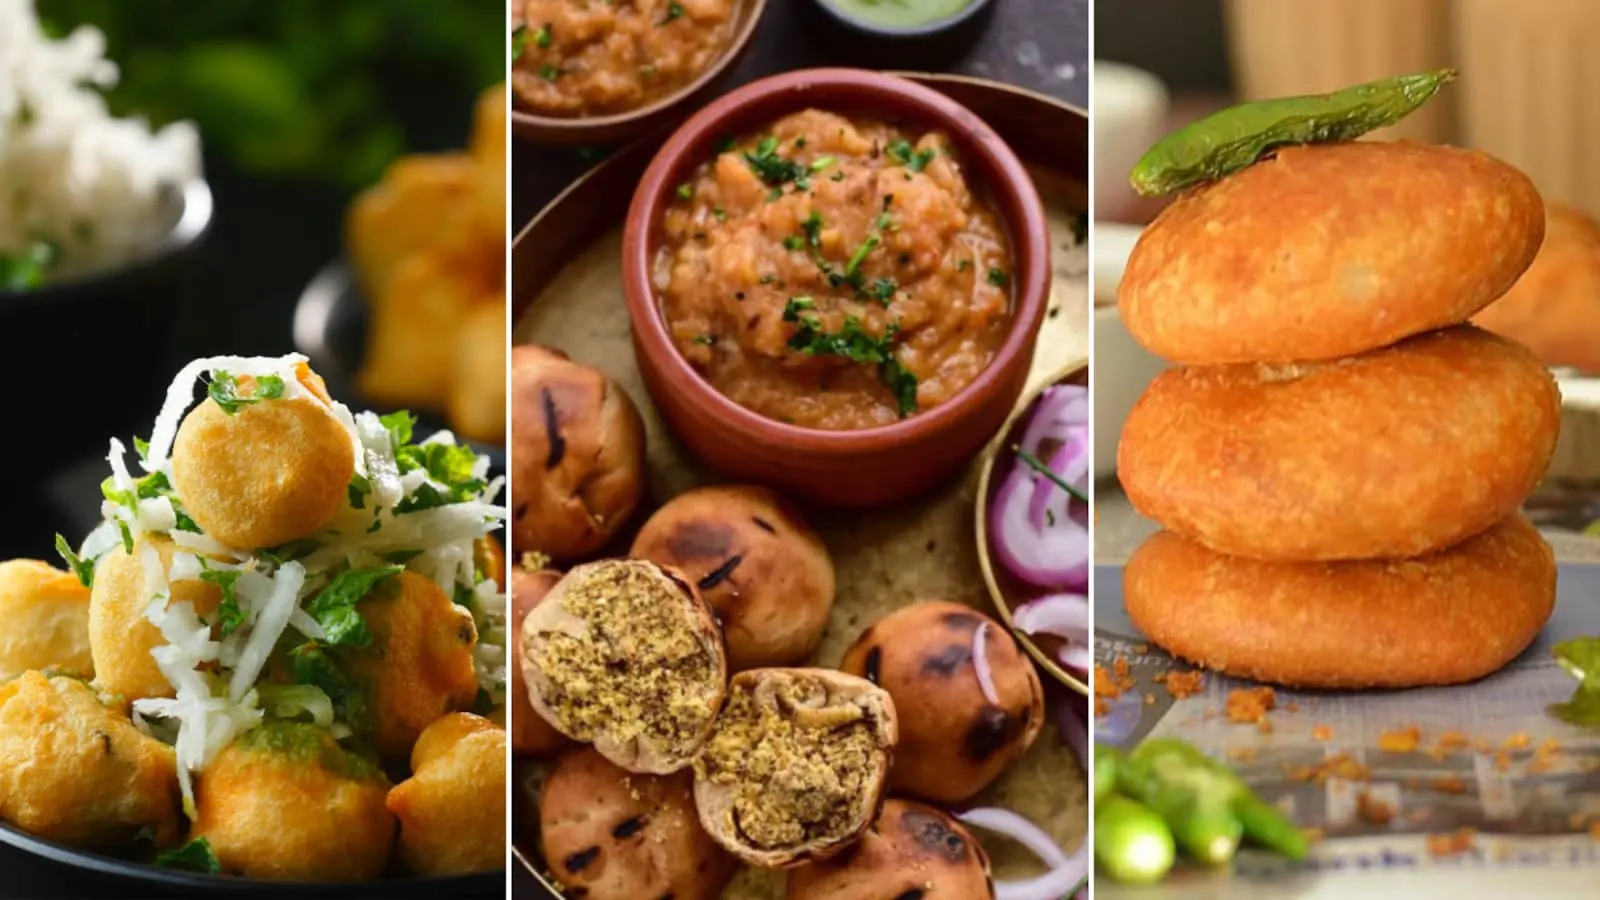 Discover the top 10 traditional foods of Ayodhya that offer a unique culinary experience reflecting the city's rich cultural heritage.